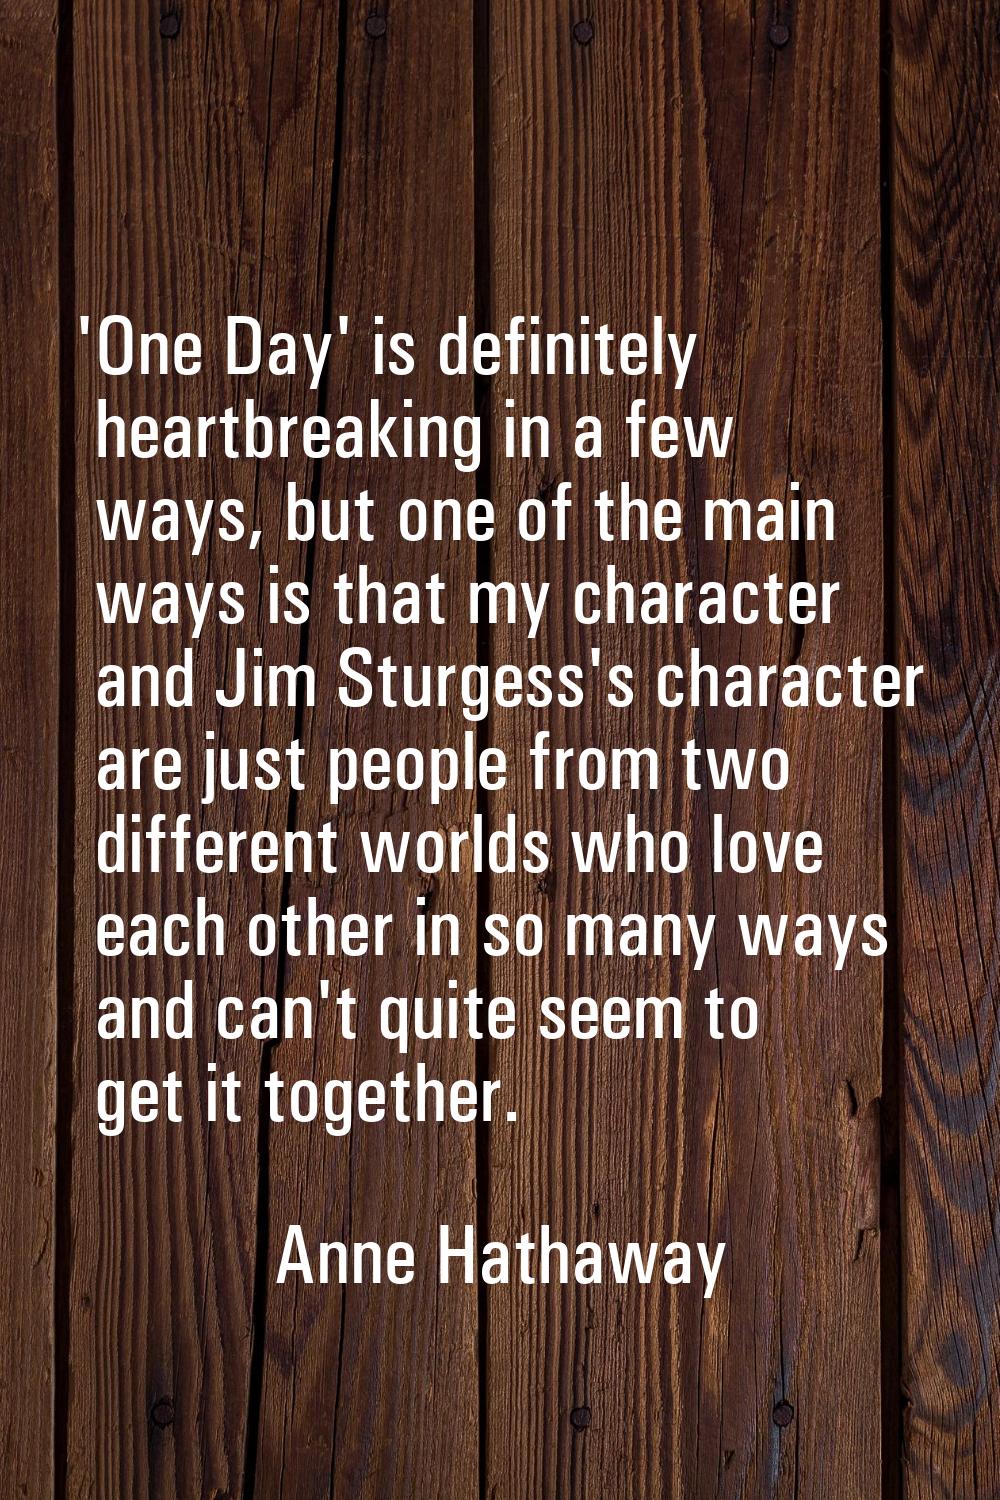 'One Day' is definitely heartbreaking in a few ways, but one of the main ways is that my character 